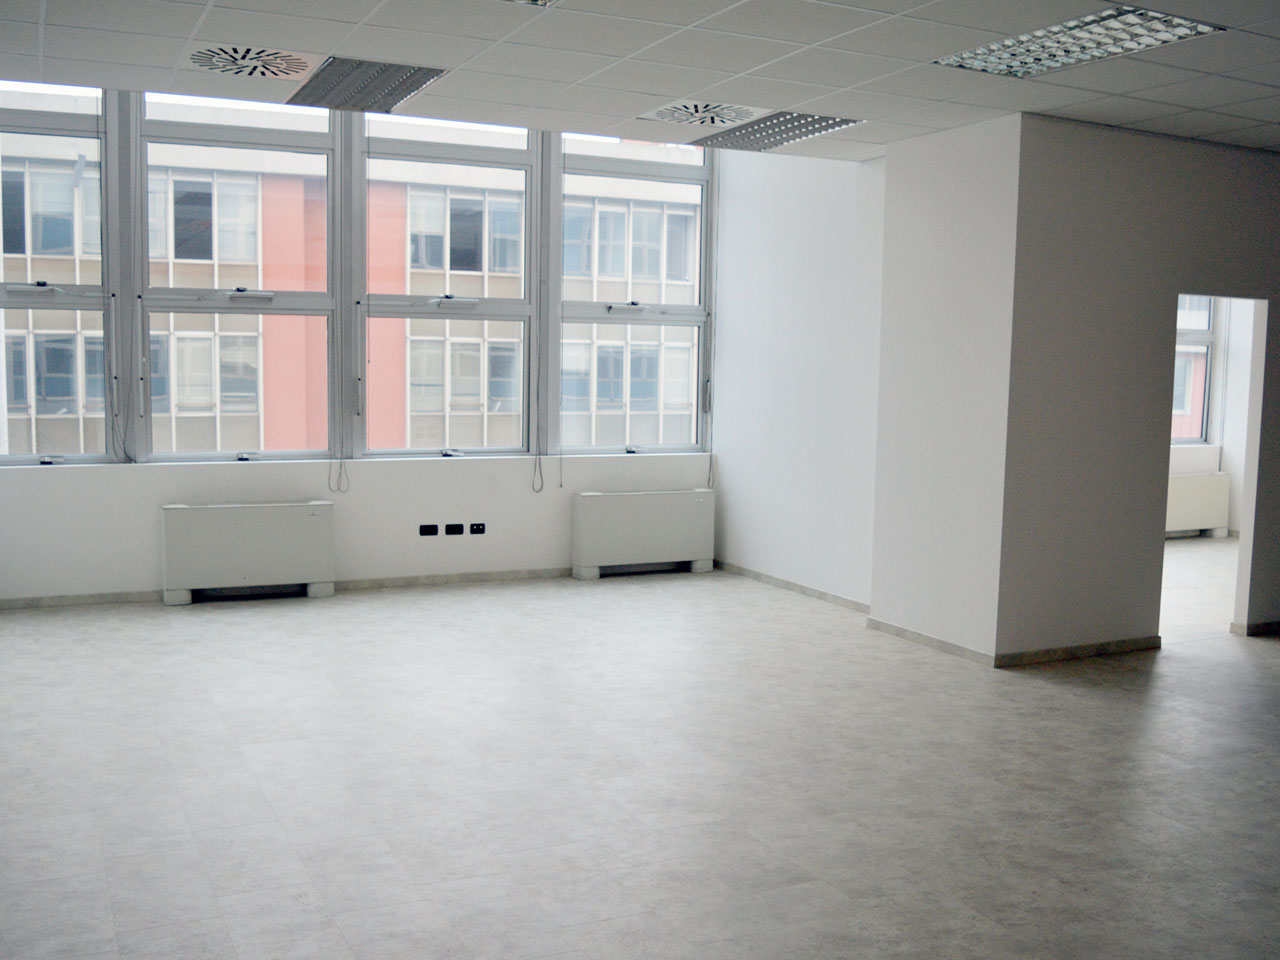 Office west side - office to rent in Milan - 750 mq (8073 sqft)